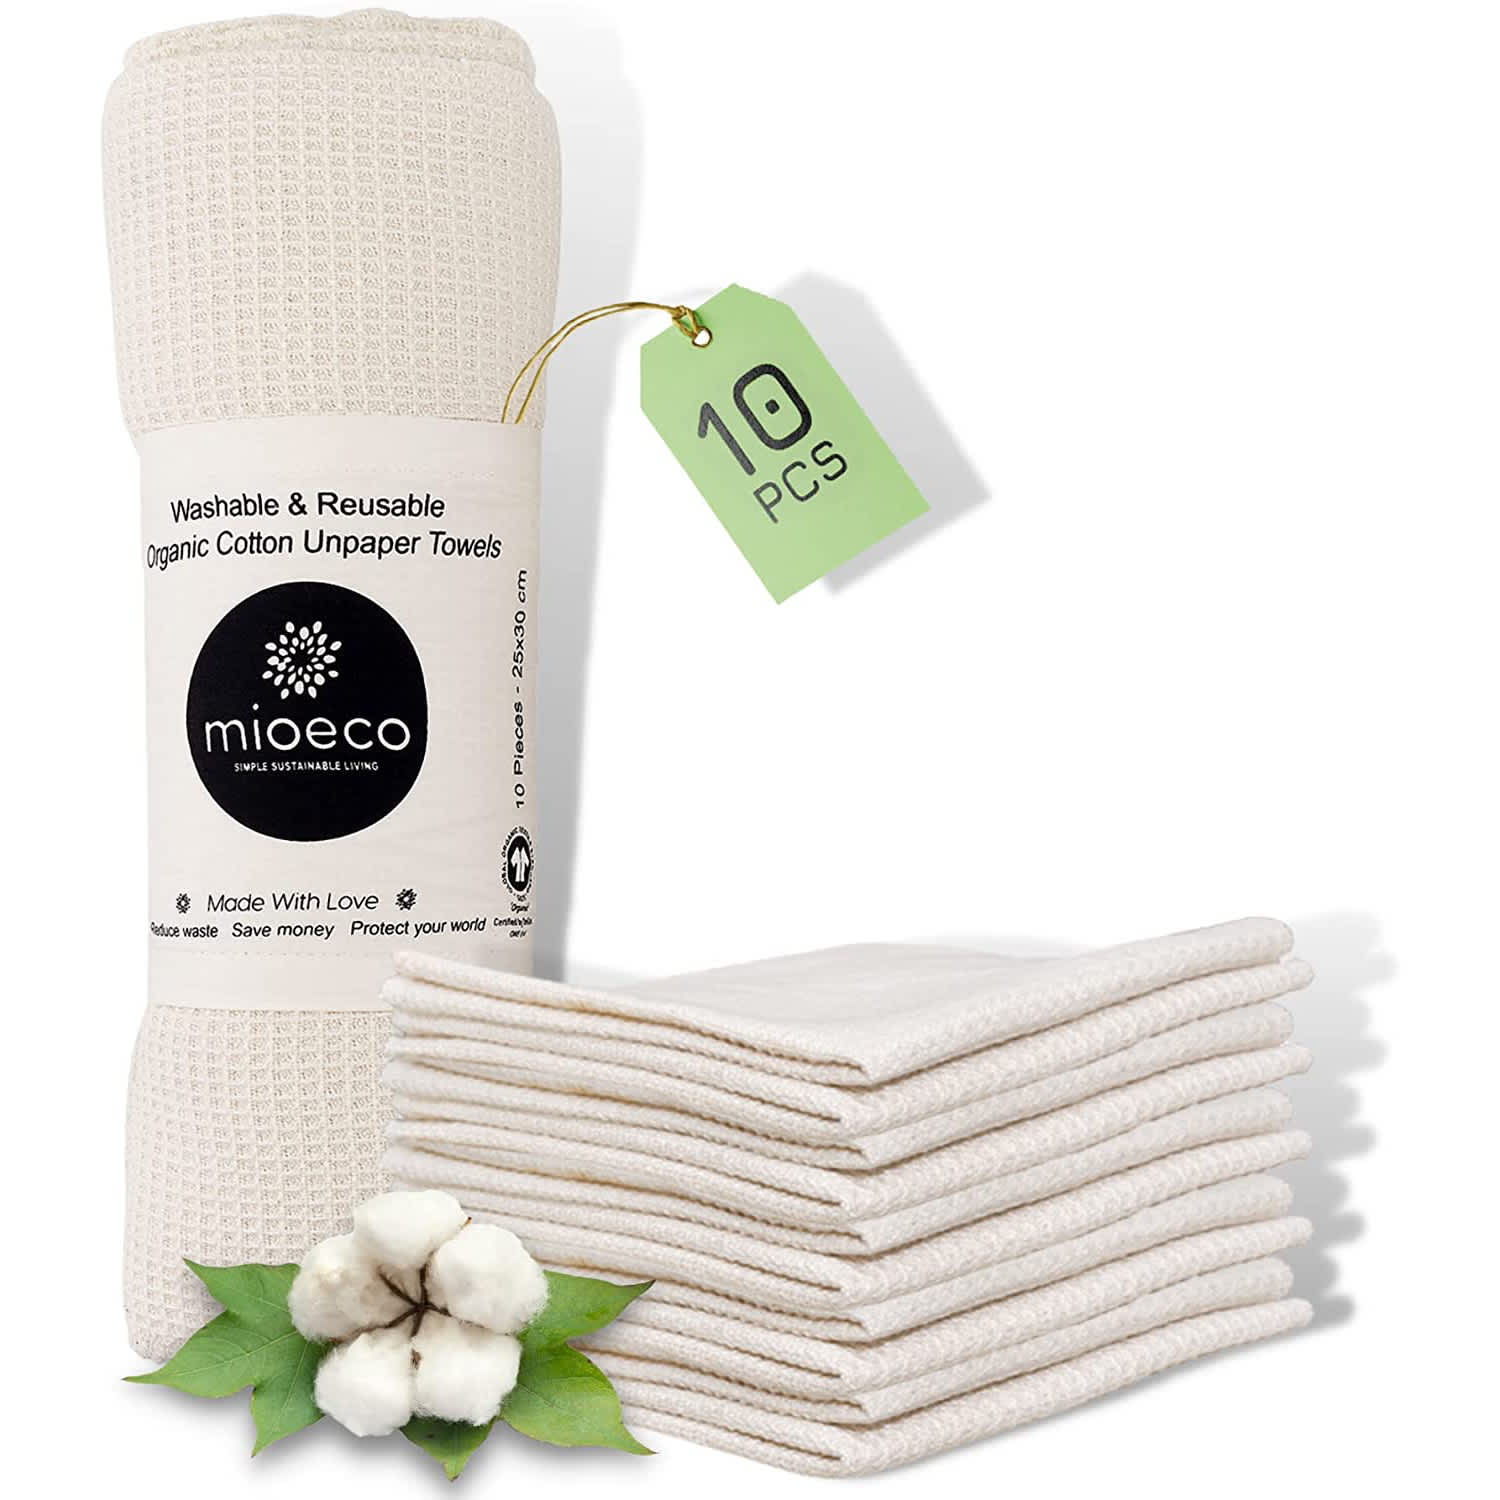 http://cdn.apartmenttherapy.info/image/upload/v1677027376/gen-workflow/product-database/mioeco-reusable-paper-towels.jpg